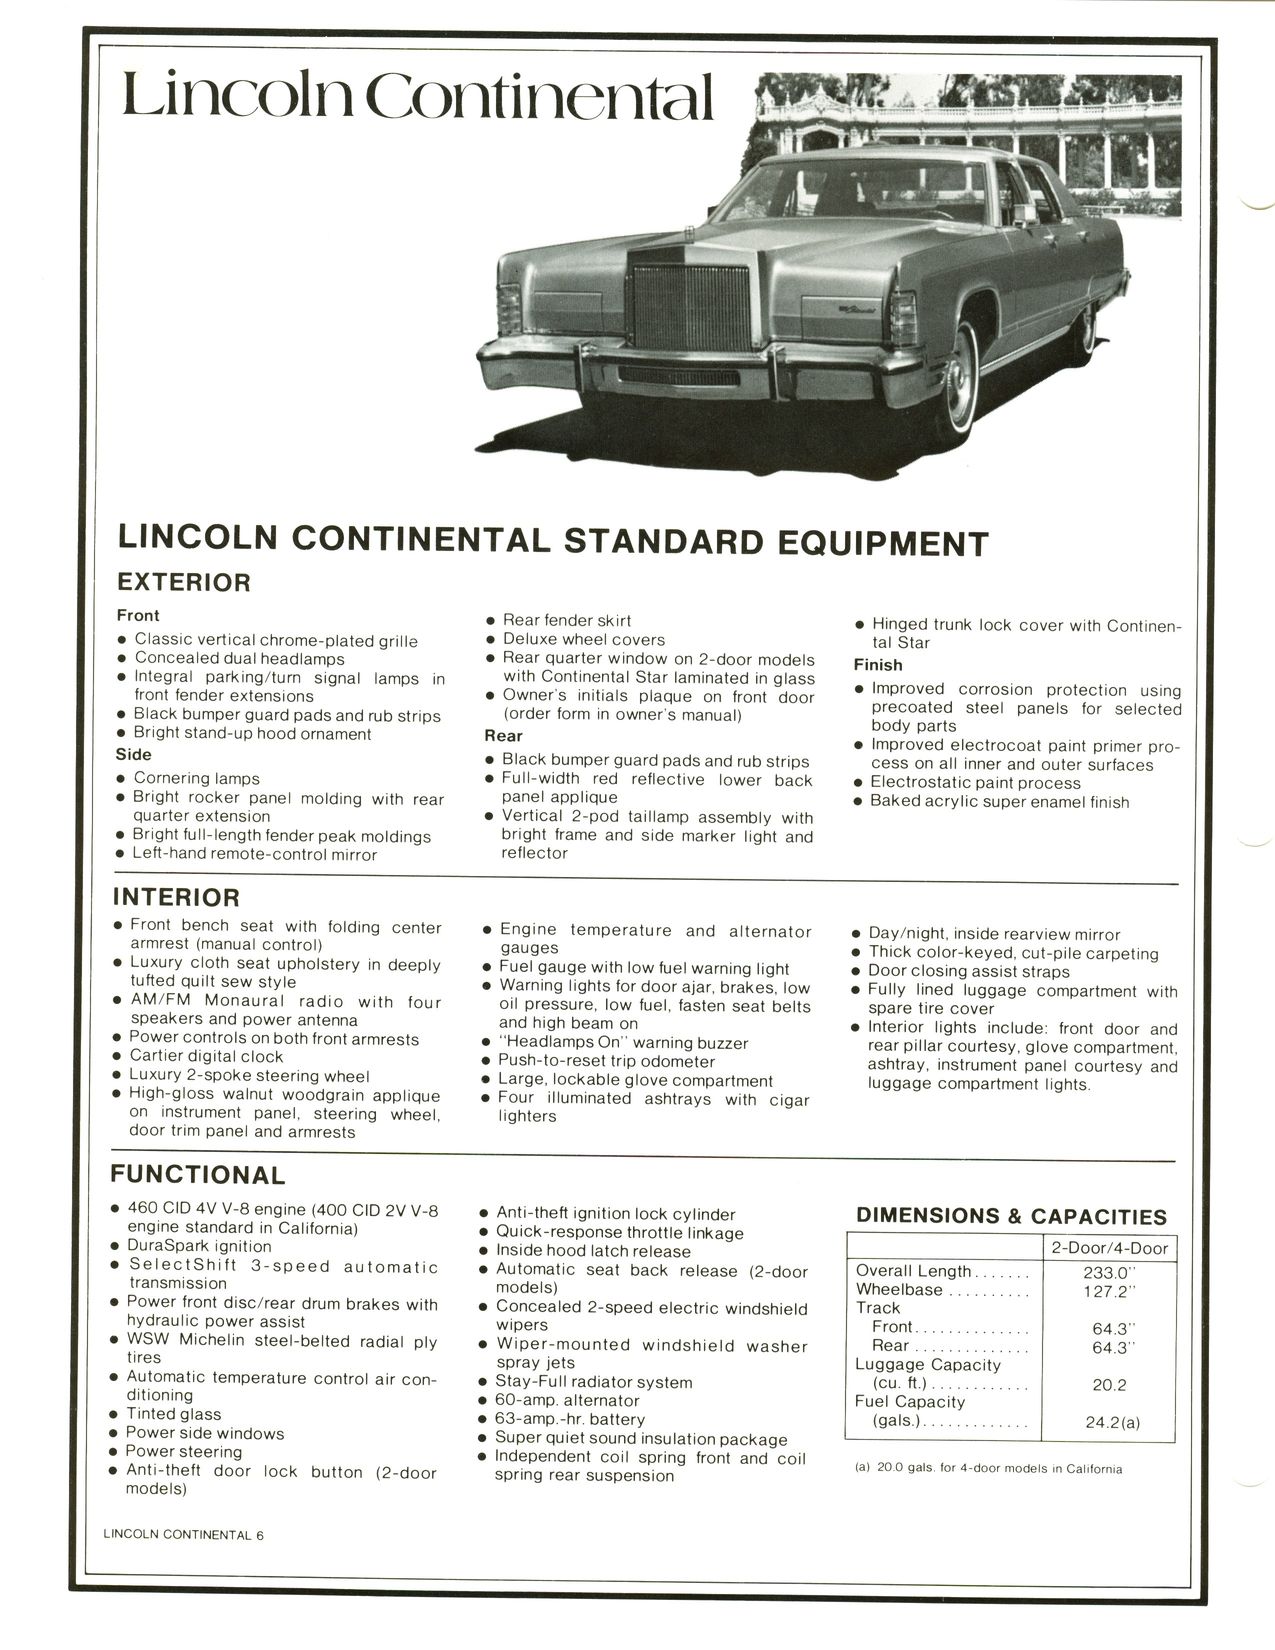 1977 Continental Product Facts Book-2-06